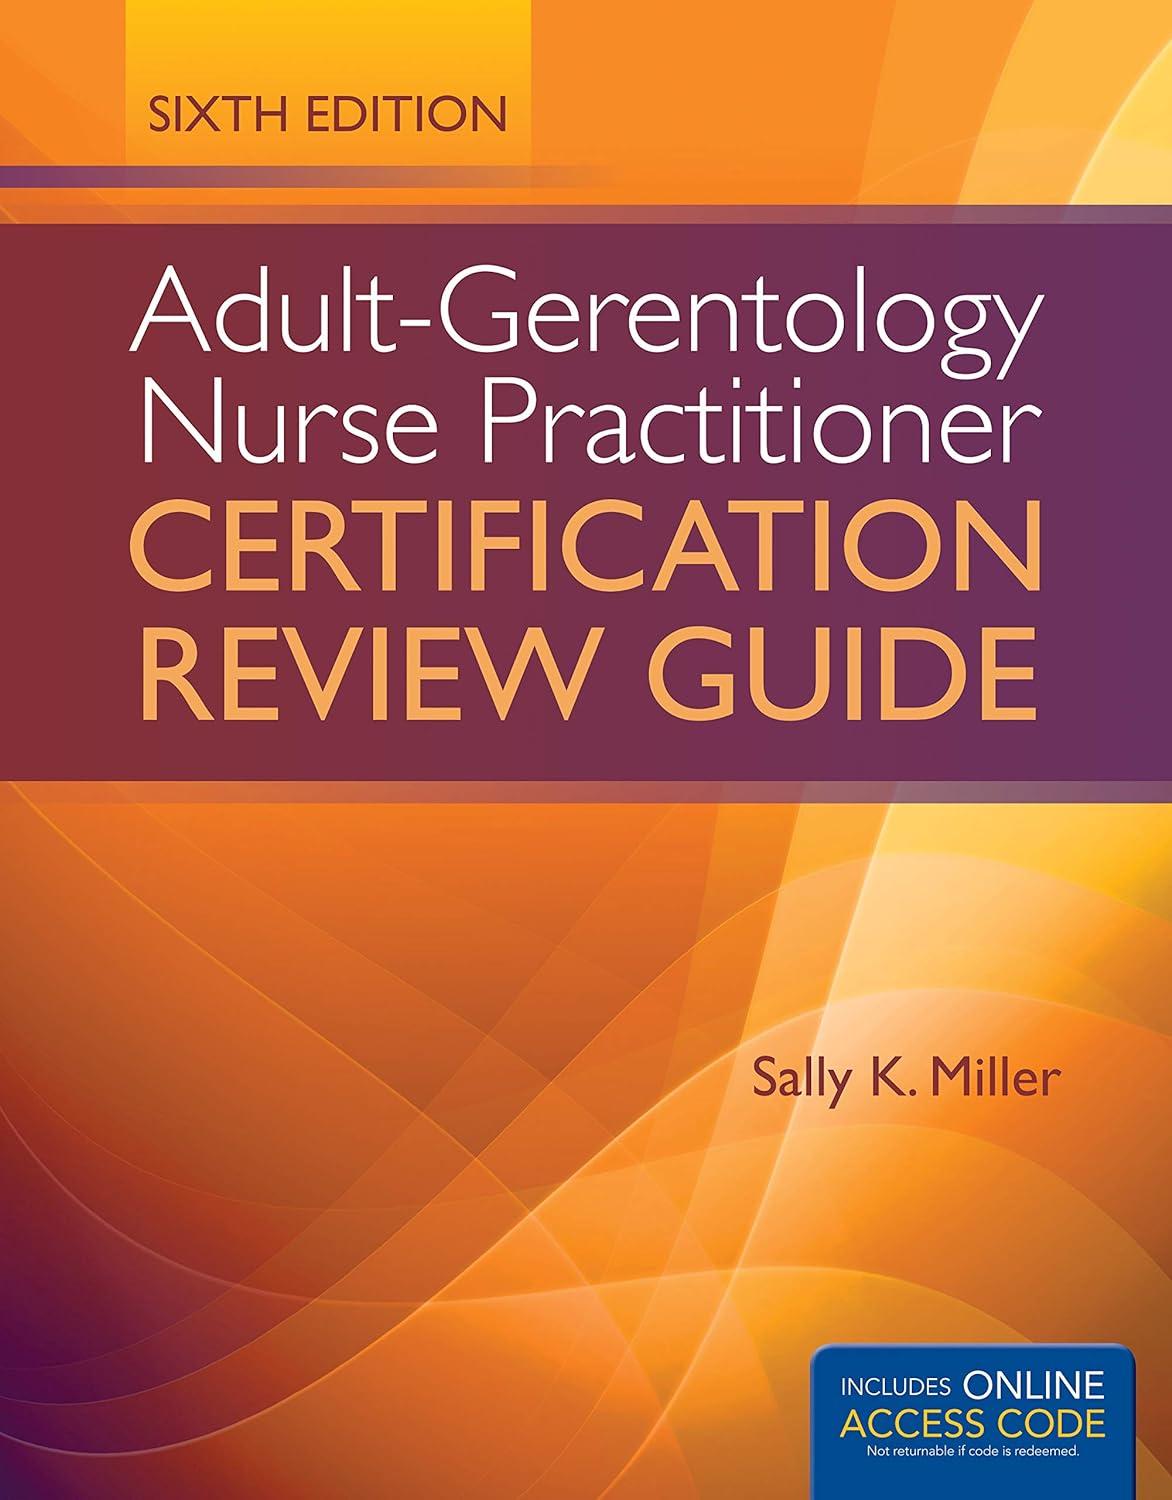 adult-gerontology nurse practitioner certification review guide 6th edition sally k. miller 1284049671,